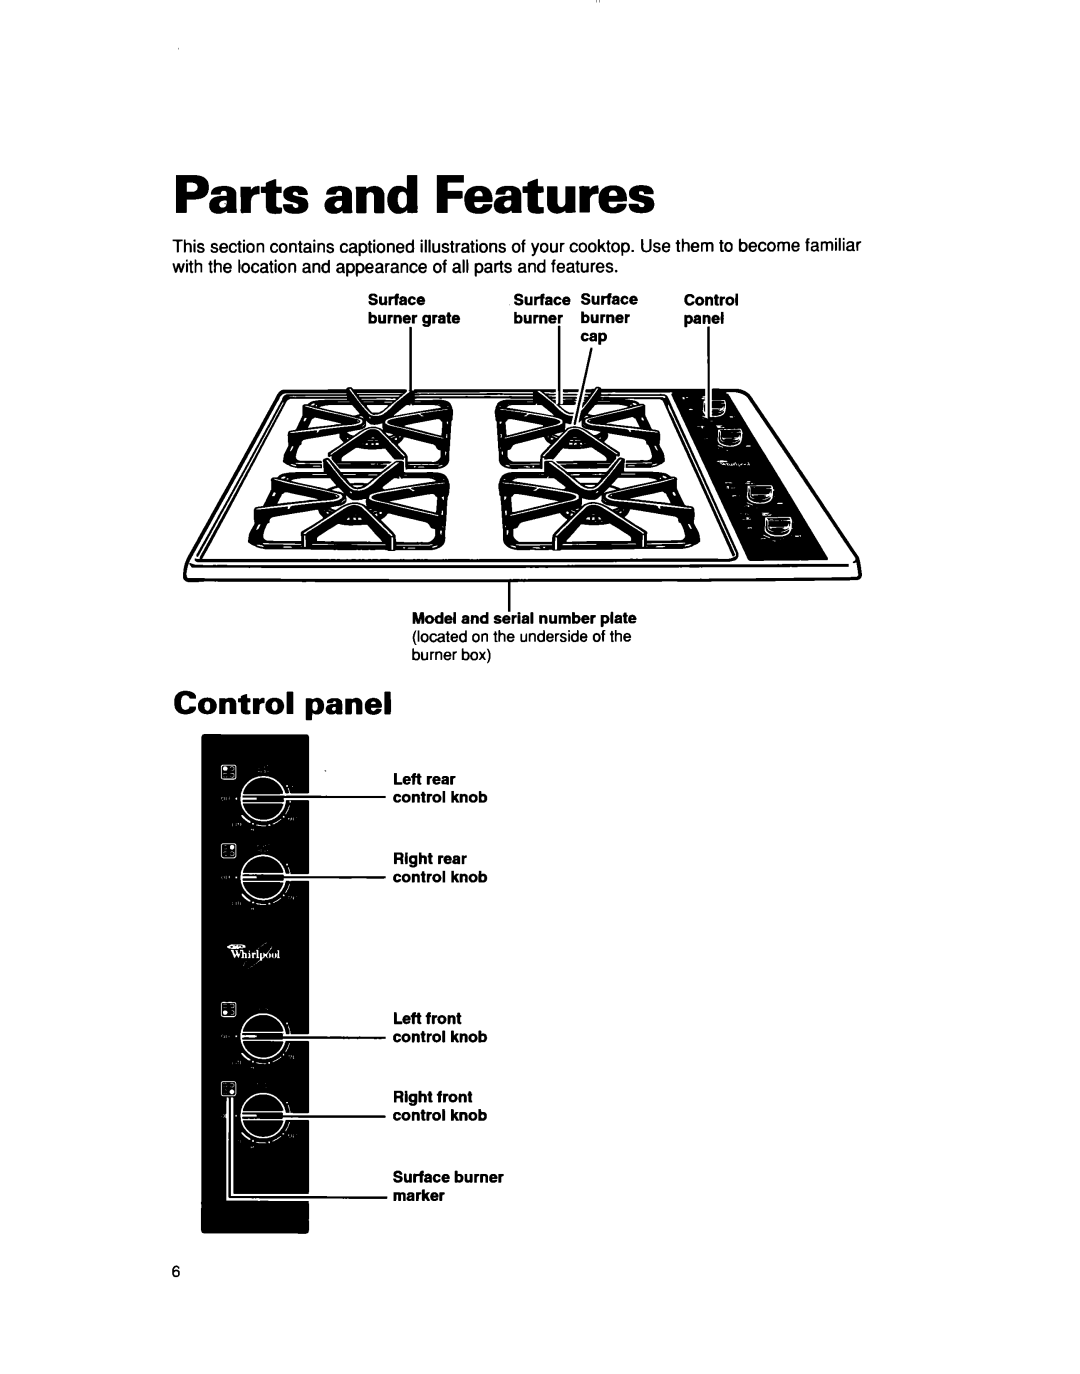 Whirlpool SC6640EE Parts and Features, Control panel, Surface burner grate, Model and serial number plate 